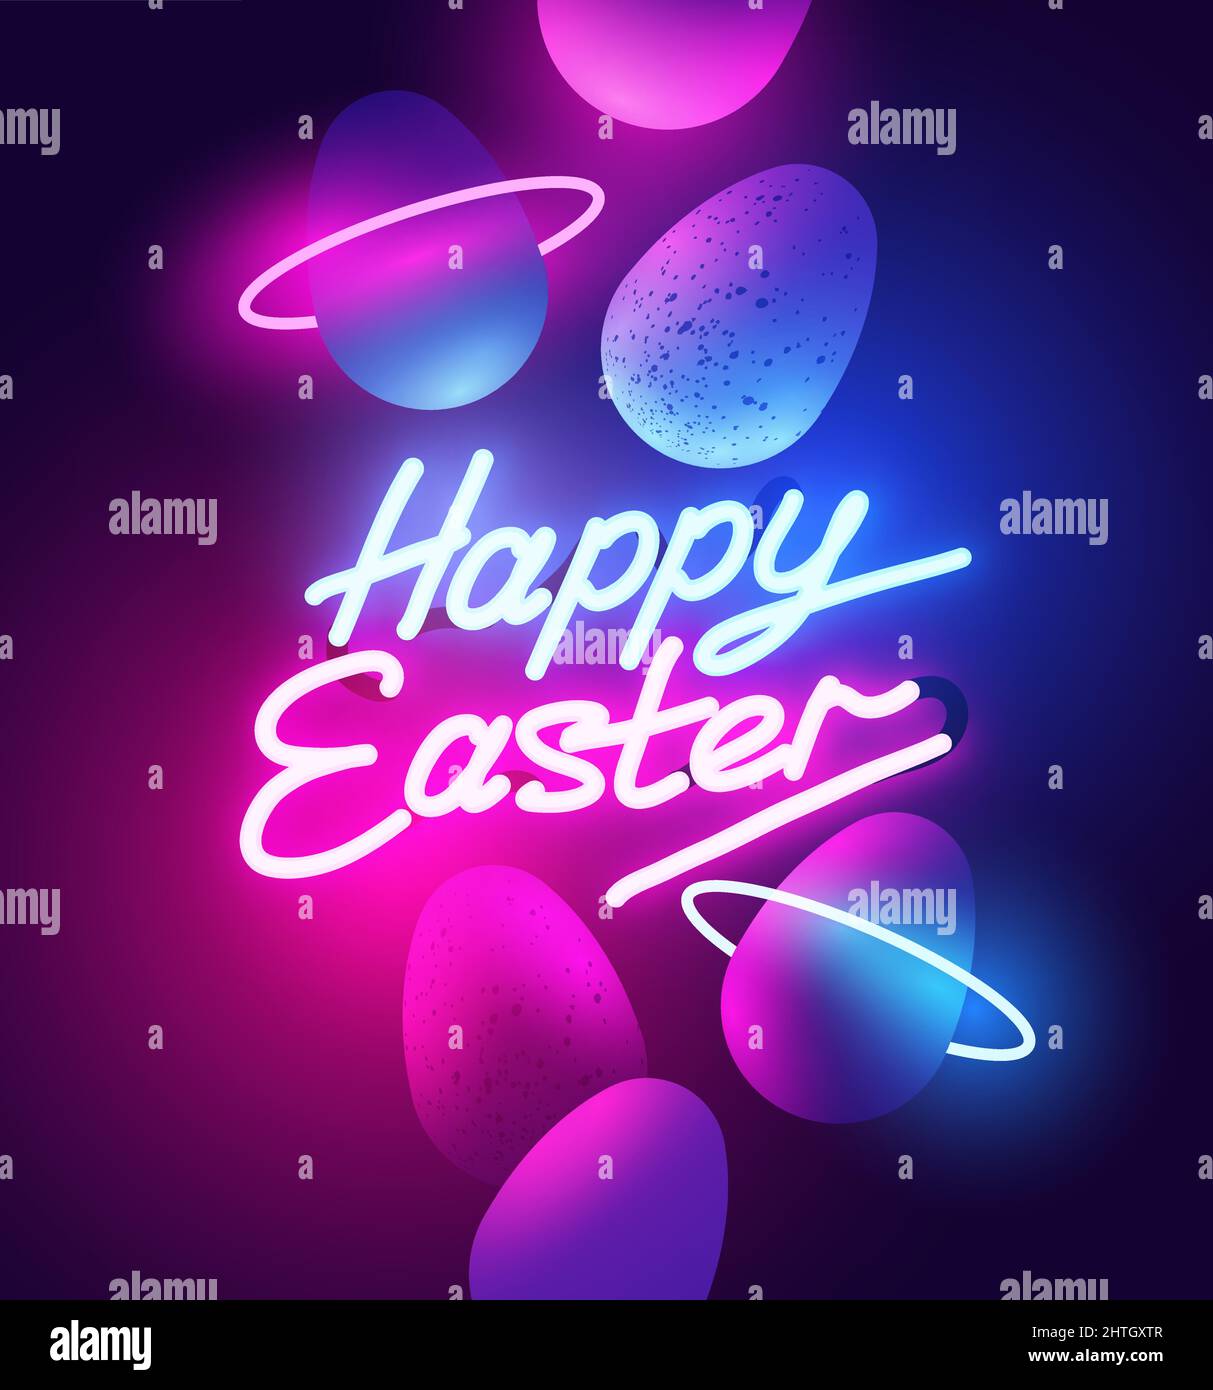 A glowing retro neon sign with happy easter text and chocolate eggs. Vector illustration. Stock Vector